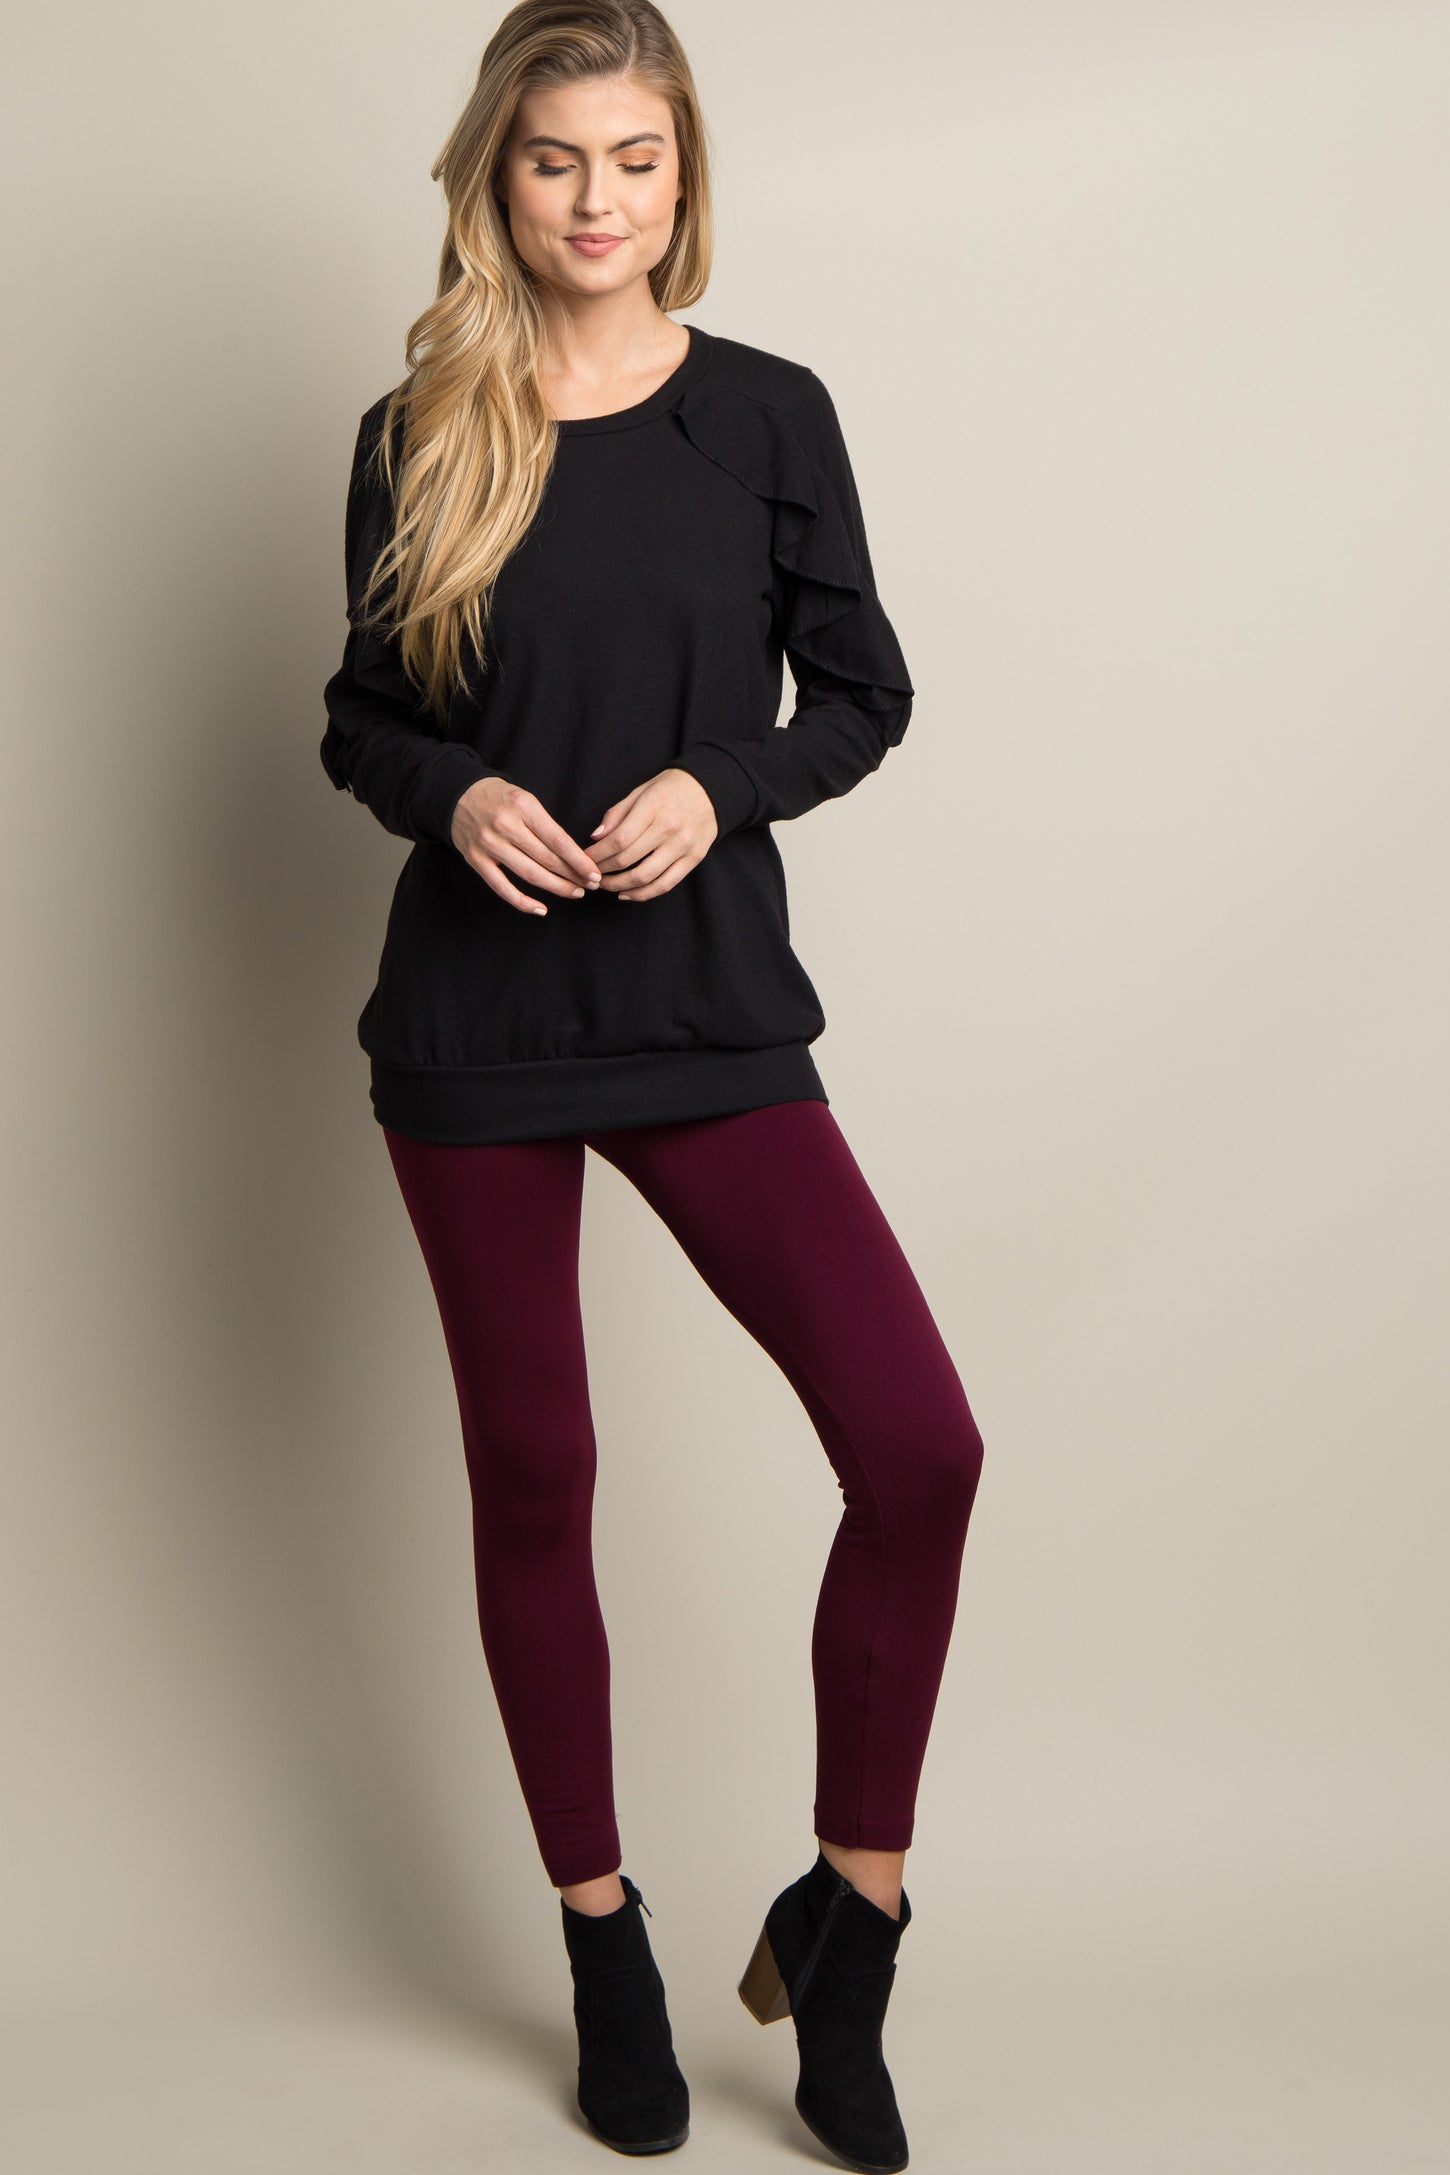 Conceited Fleece Lined Leggings for Women - LFL Magenta Pink